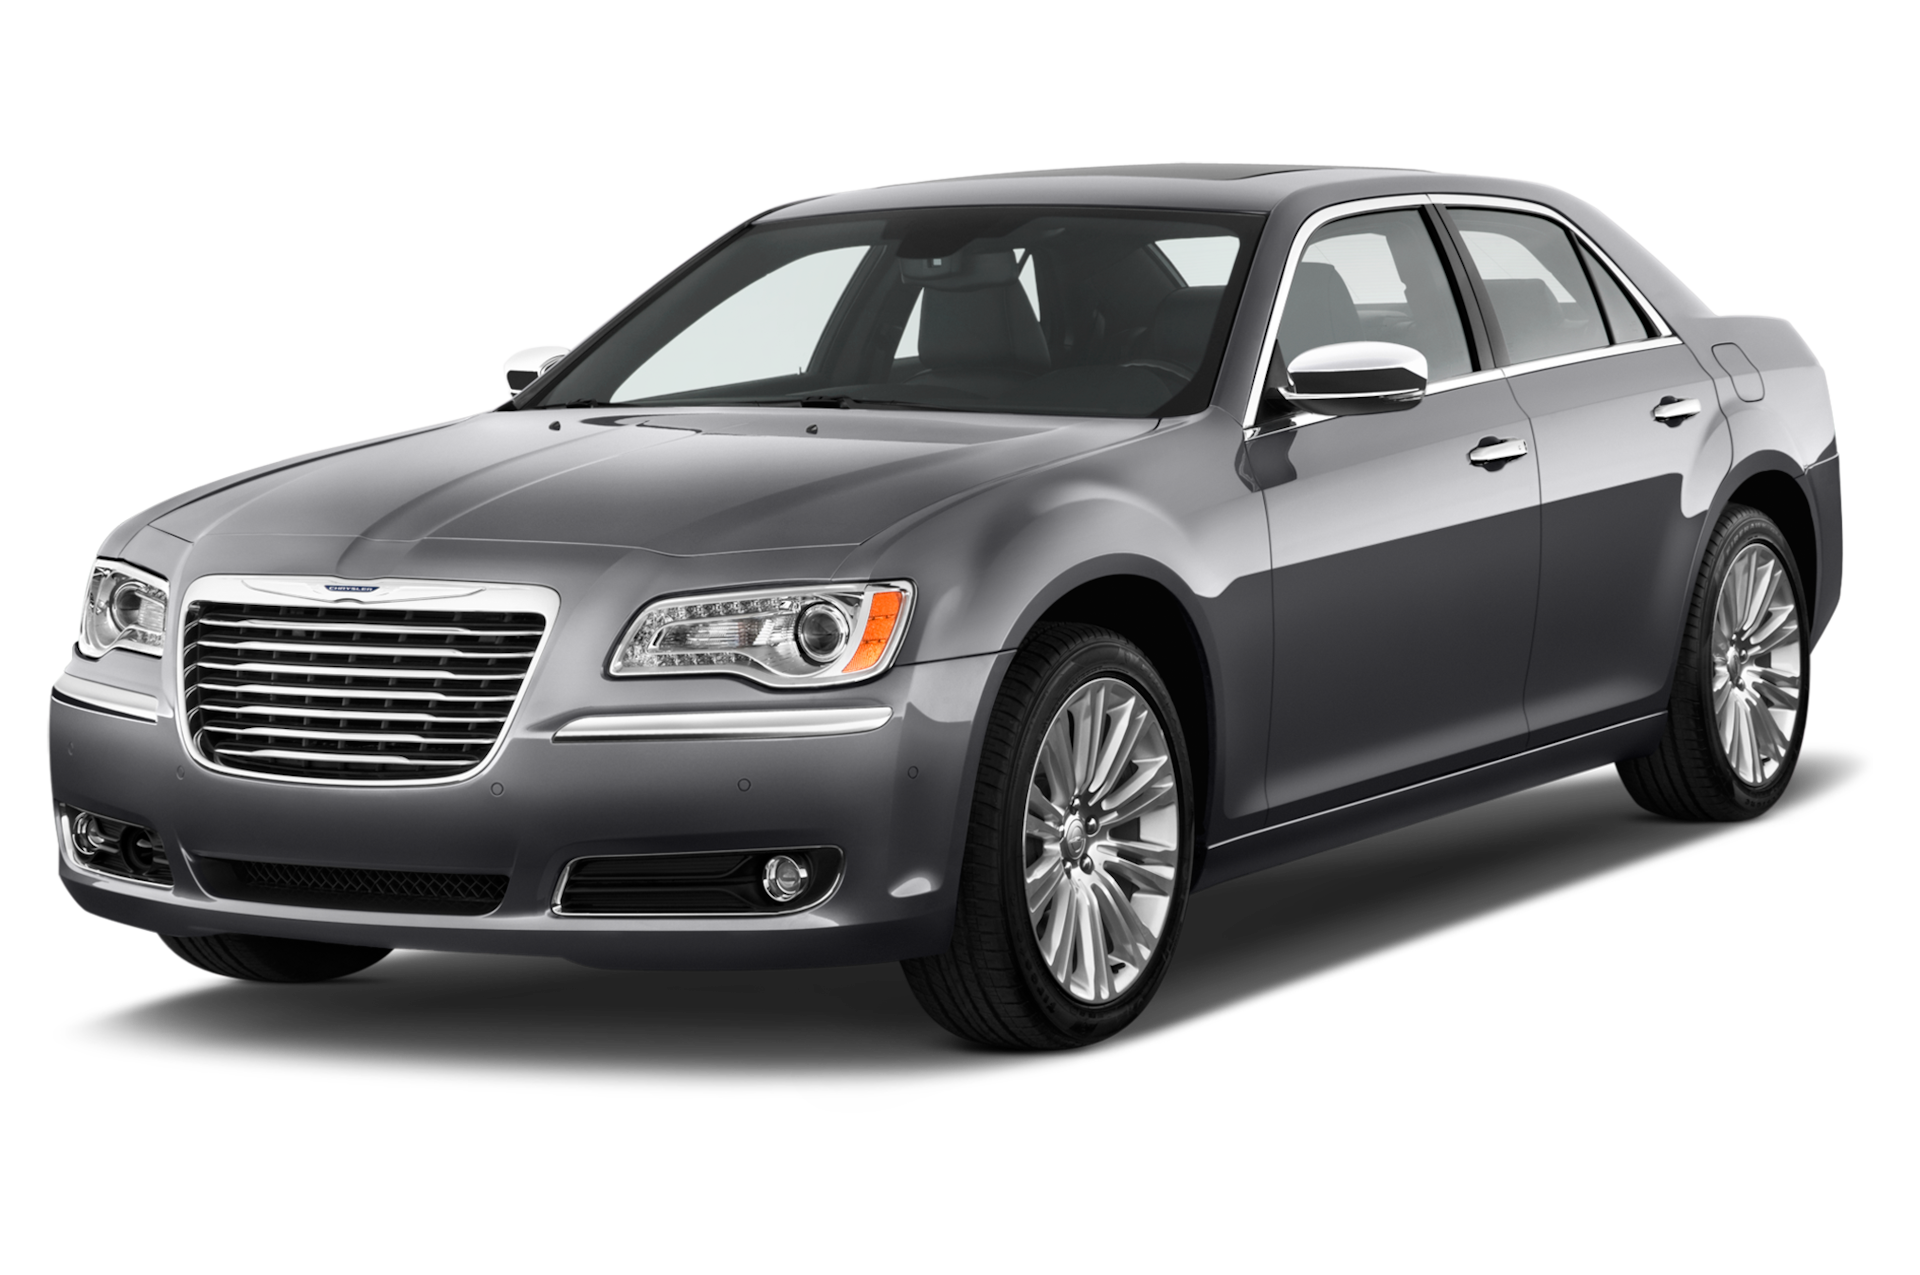 2012 Chrysler 300 Prices, Reviews, and Photos - MotorTrend